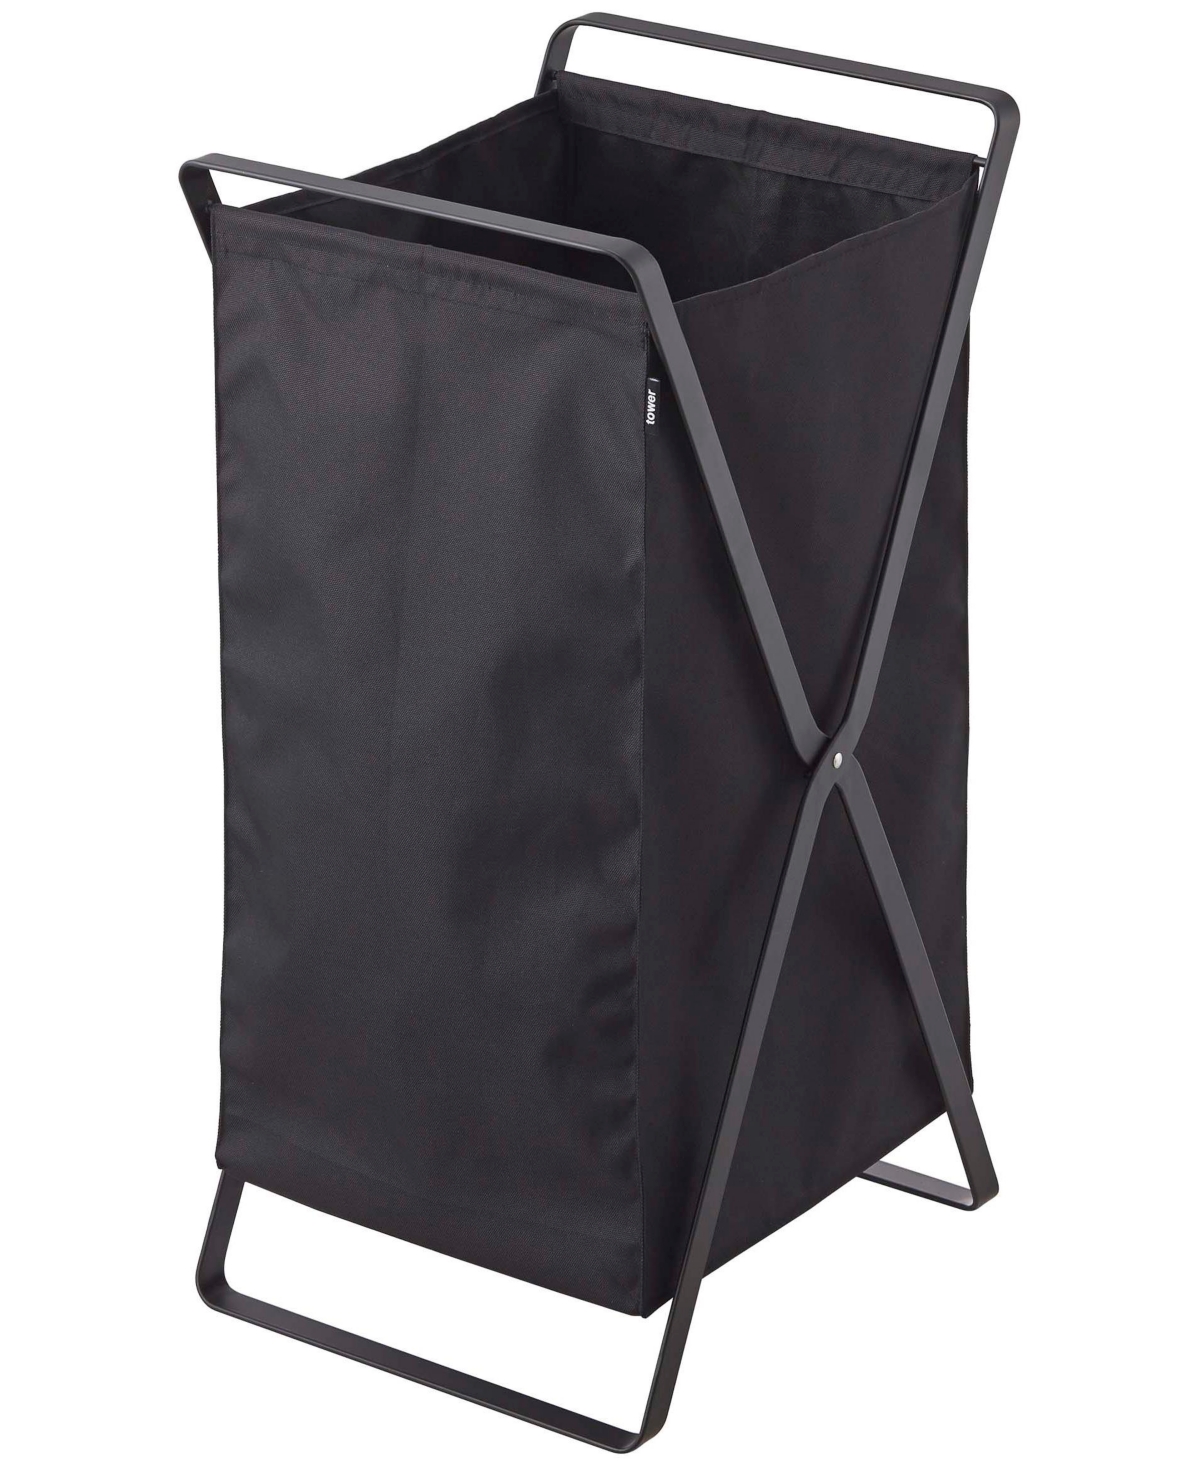 Home Tower Laundry Hamper